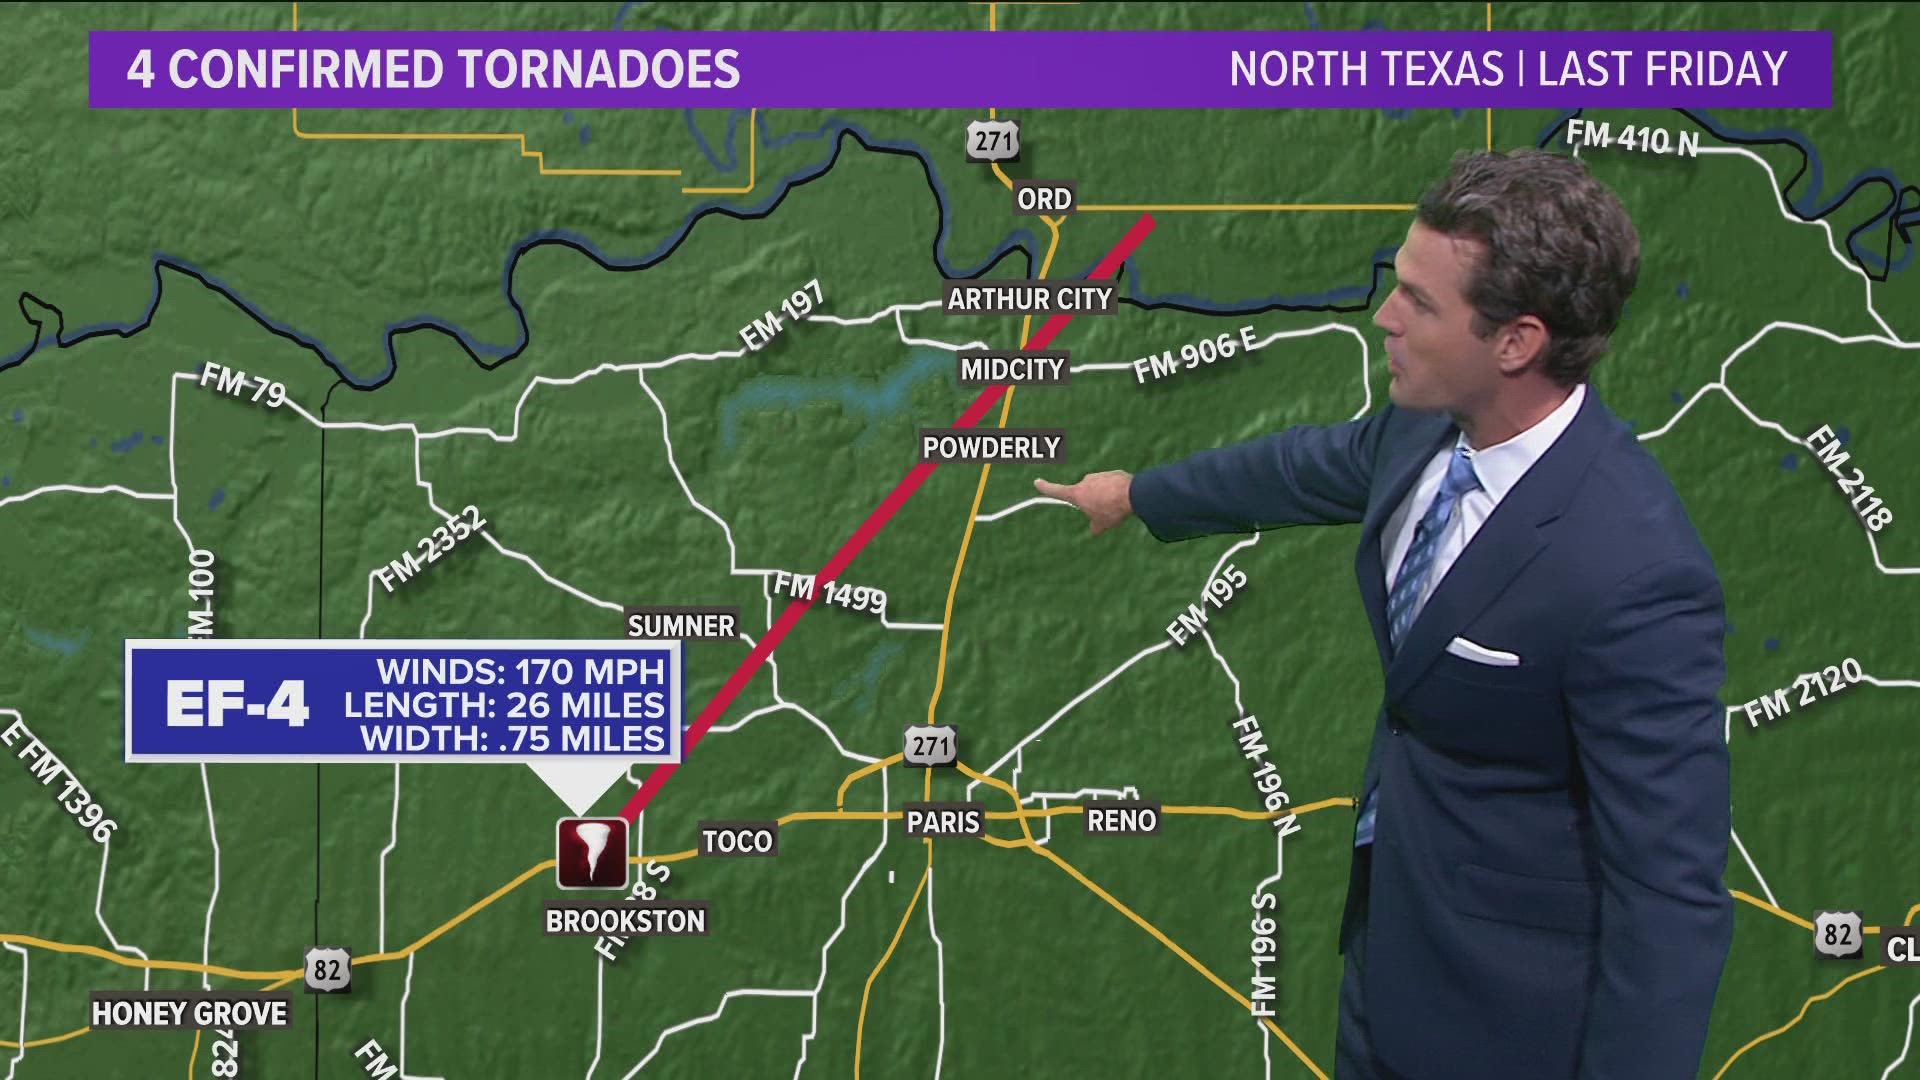 The tornado was on the ground for nearly 26 miles, from around Brookston, west of Paris, and then into southeastern Oklahoma.